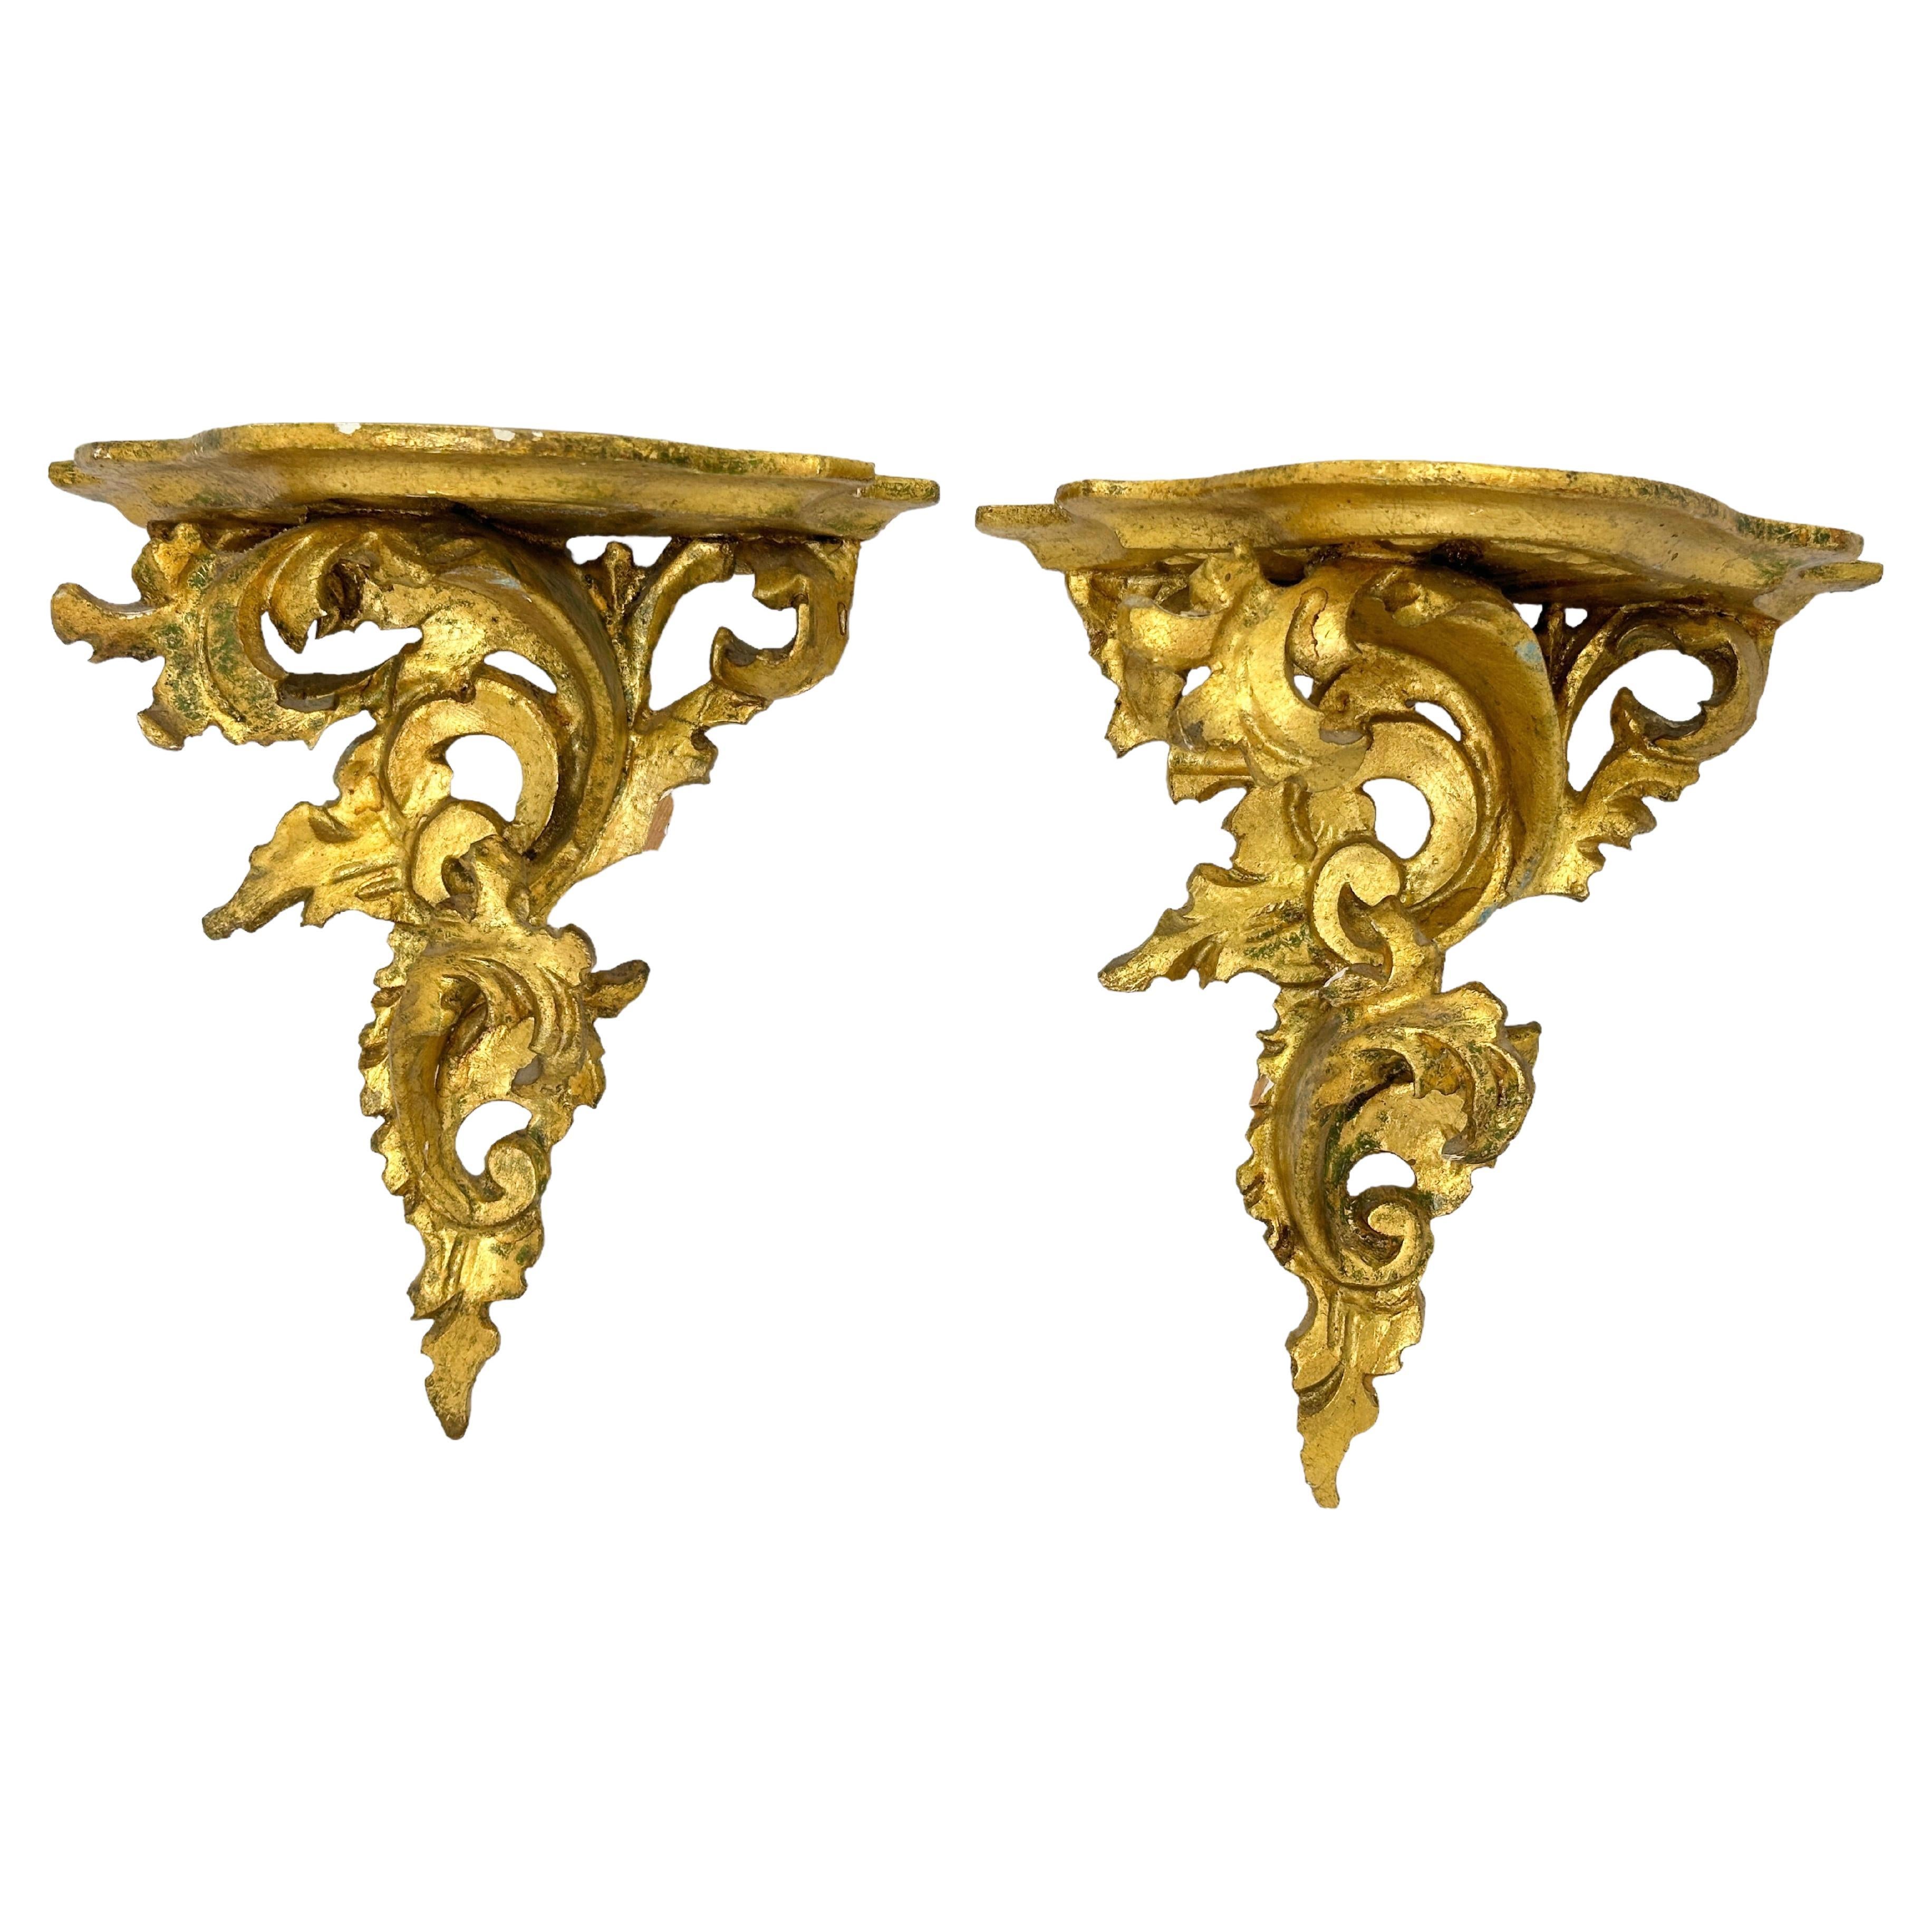 Pair of Italian Old Venetian Wall Shelf, Gilded Carved Acanthus, Rococo Style For Sale